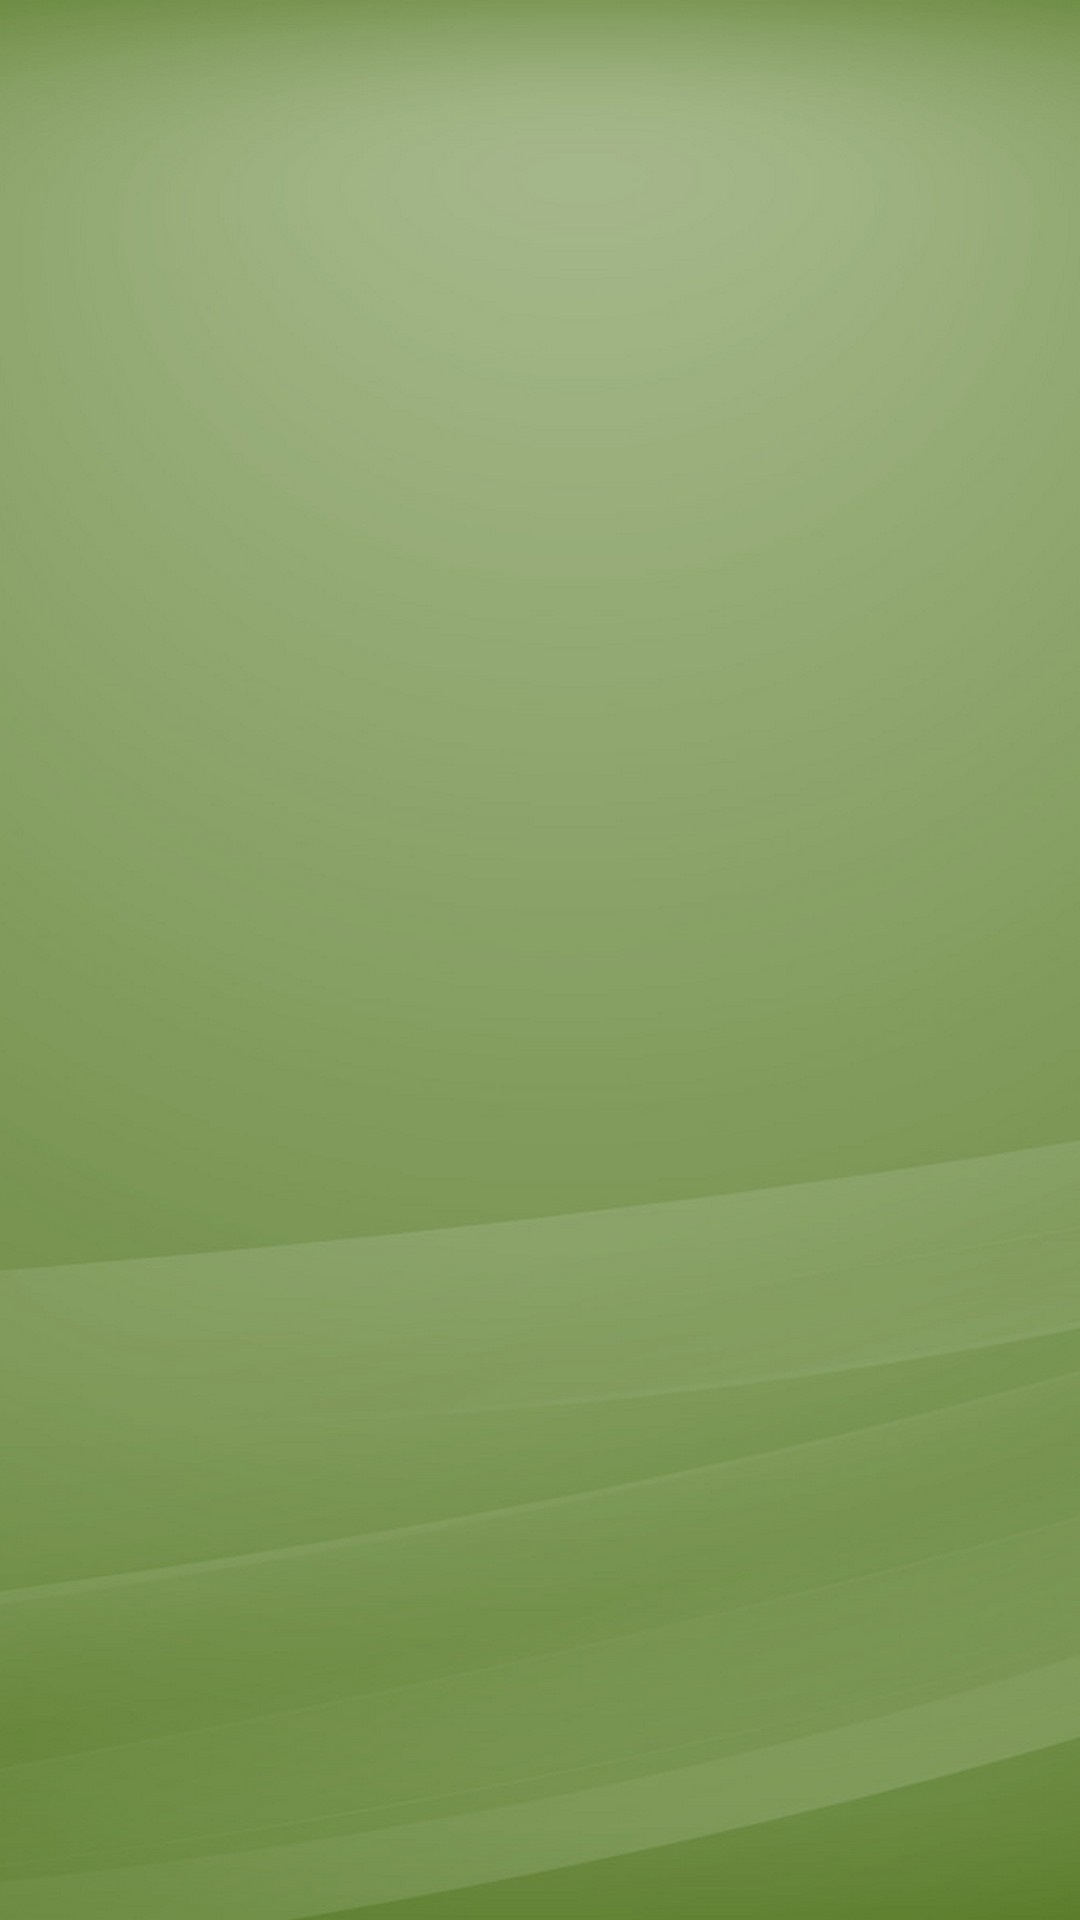 iPhone X Wallpaper Green Colour with resolution 1080X1920 pixel. You can make this wallpaper for your iPhone 5, 6, 7, 8, X backgrounds, Mobile Screensaver, or iPad Lock Screen